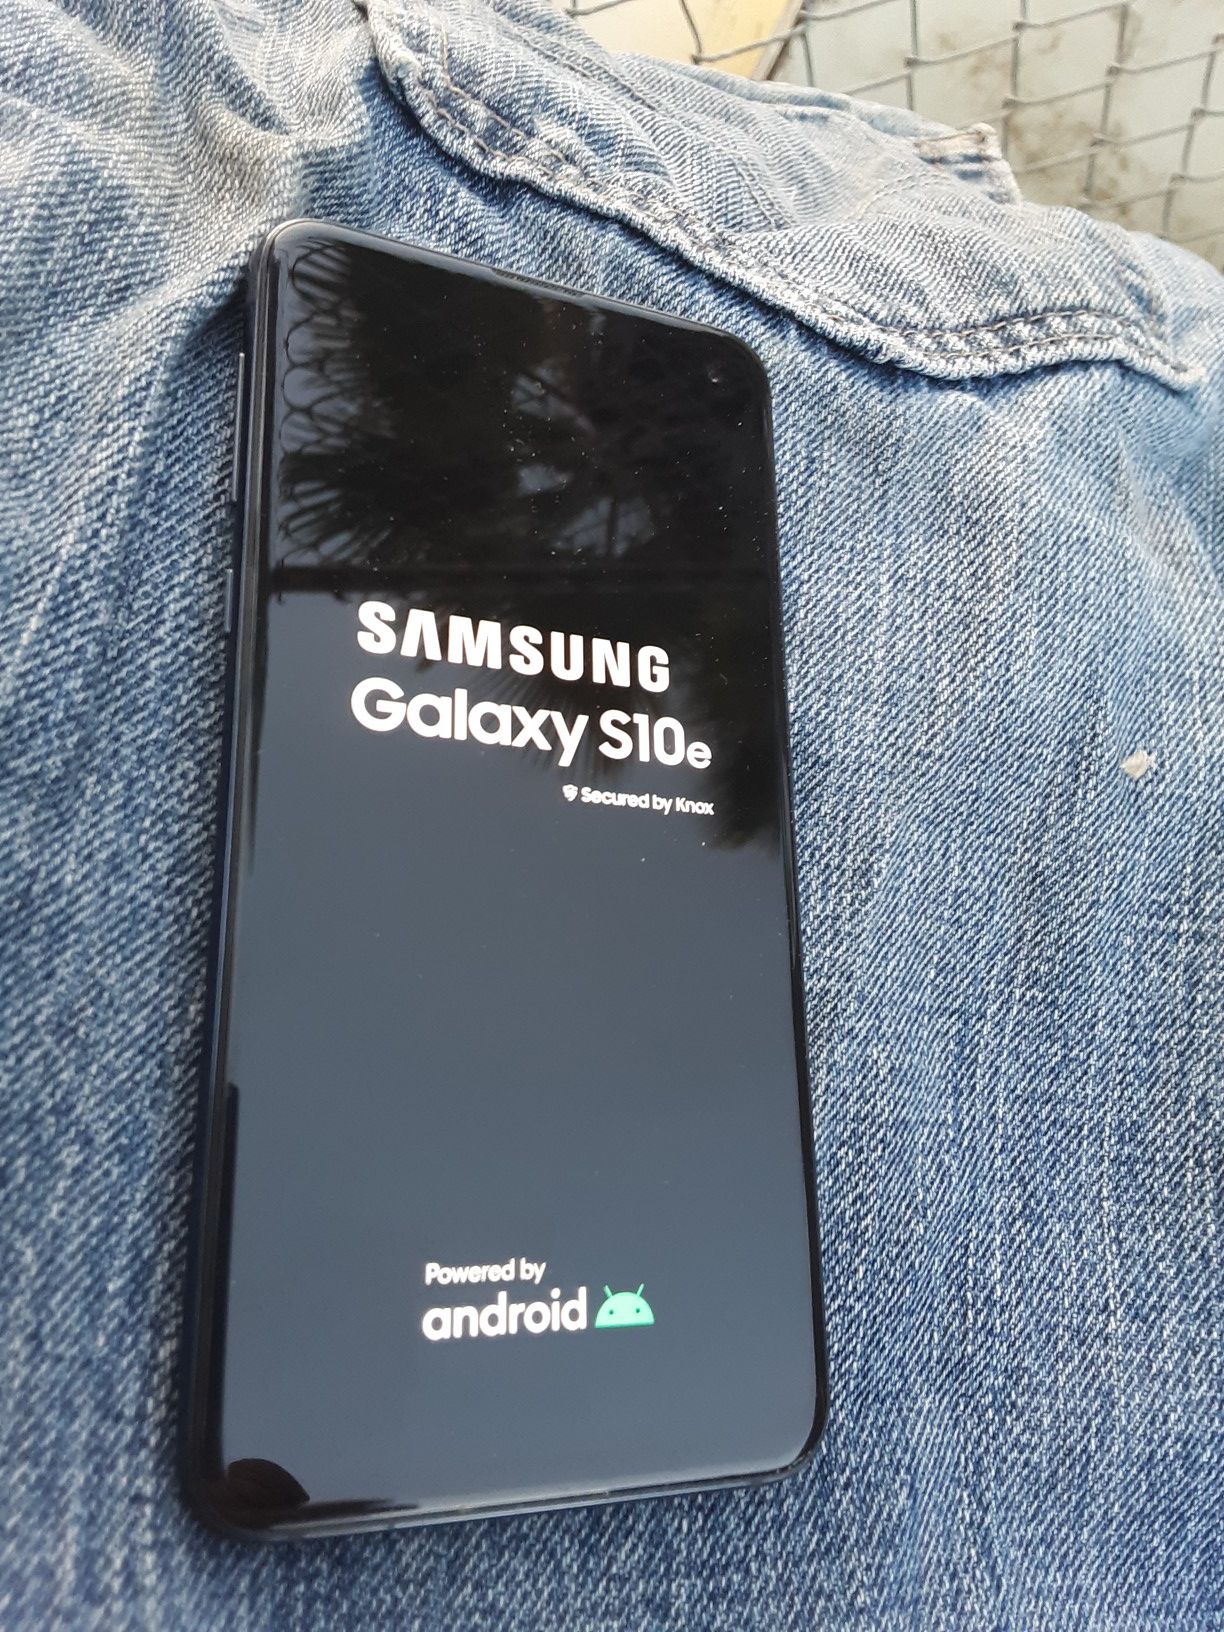 Samsung S10e 128 gb unlocked in "like new" condition .